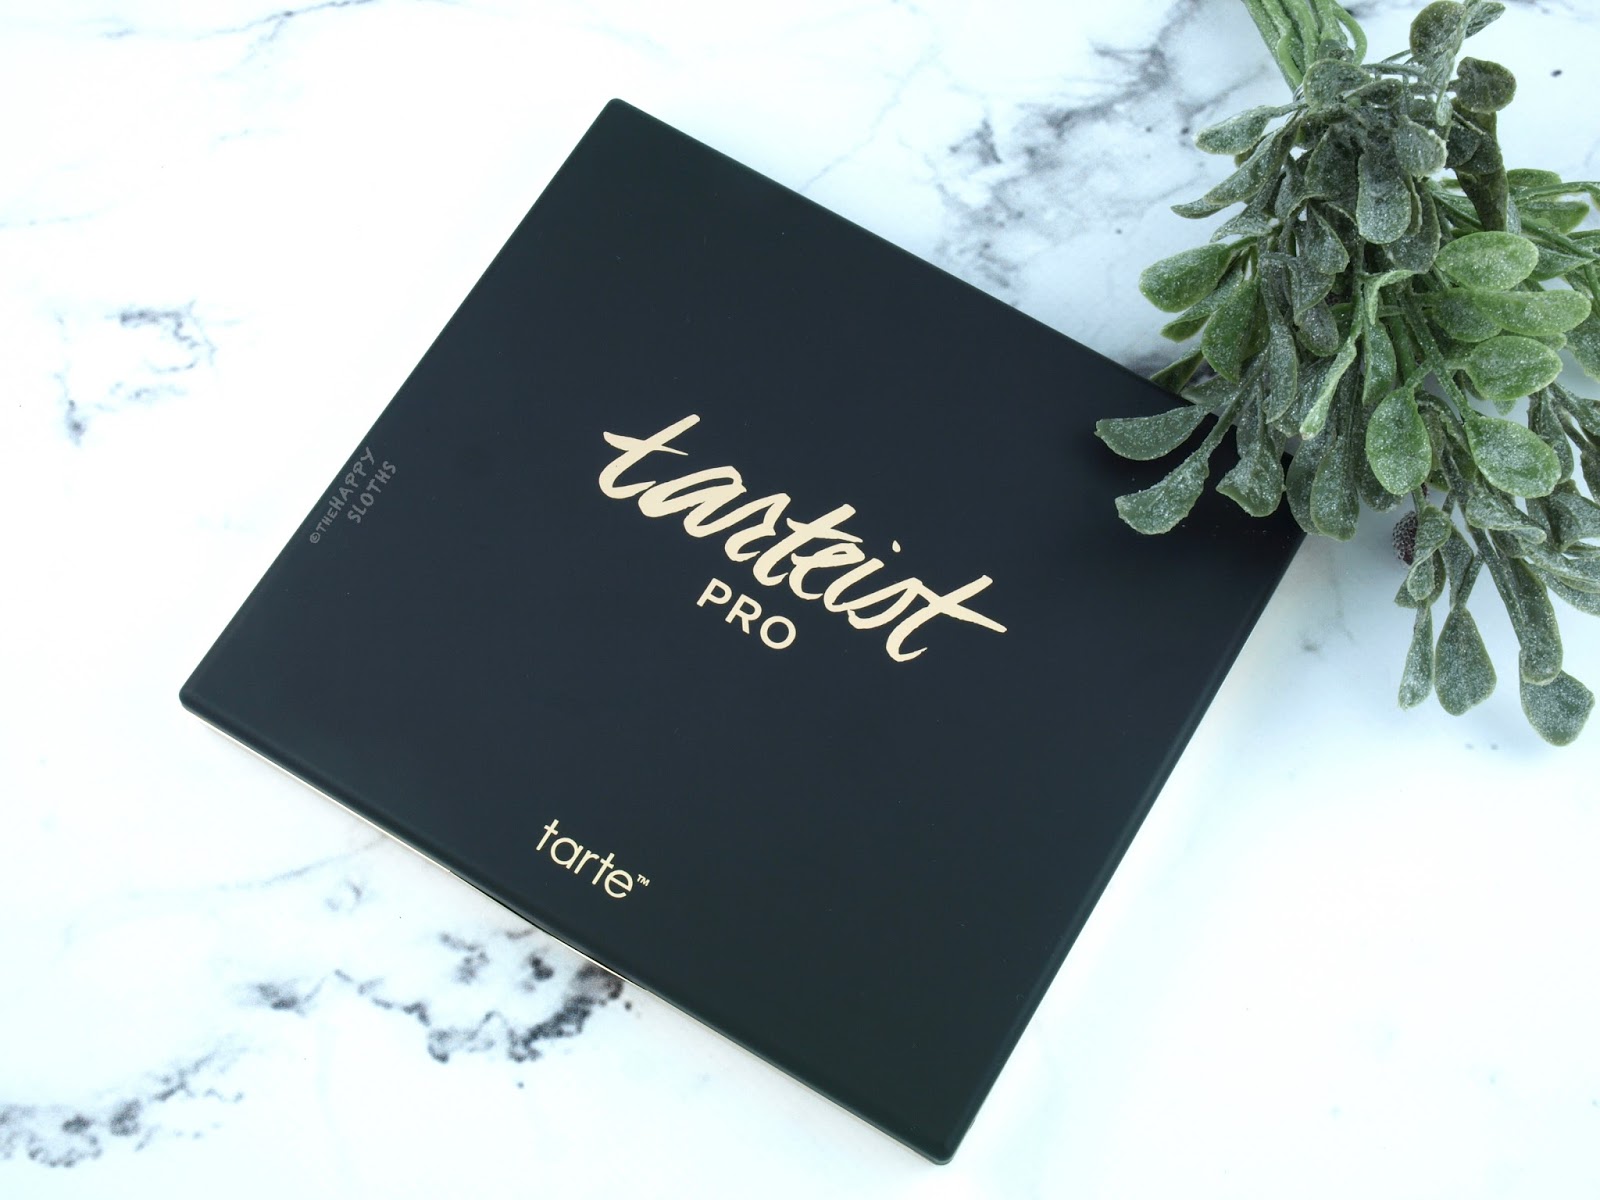 Tarte Tartiest PRO Amazonian Clay Palette: Review and Swatches